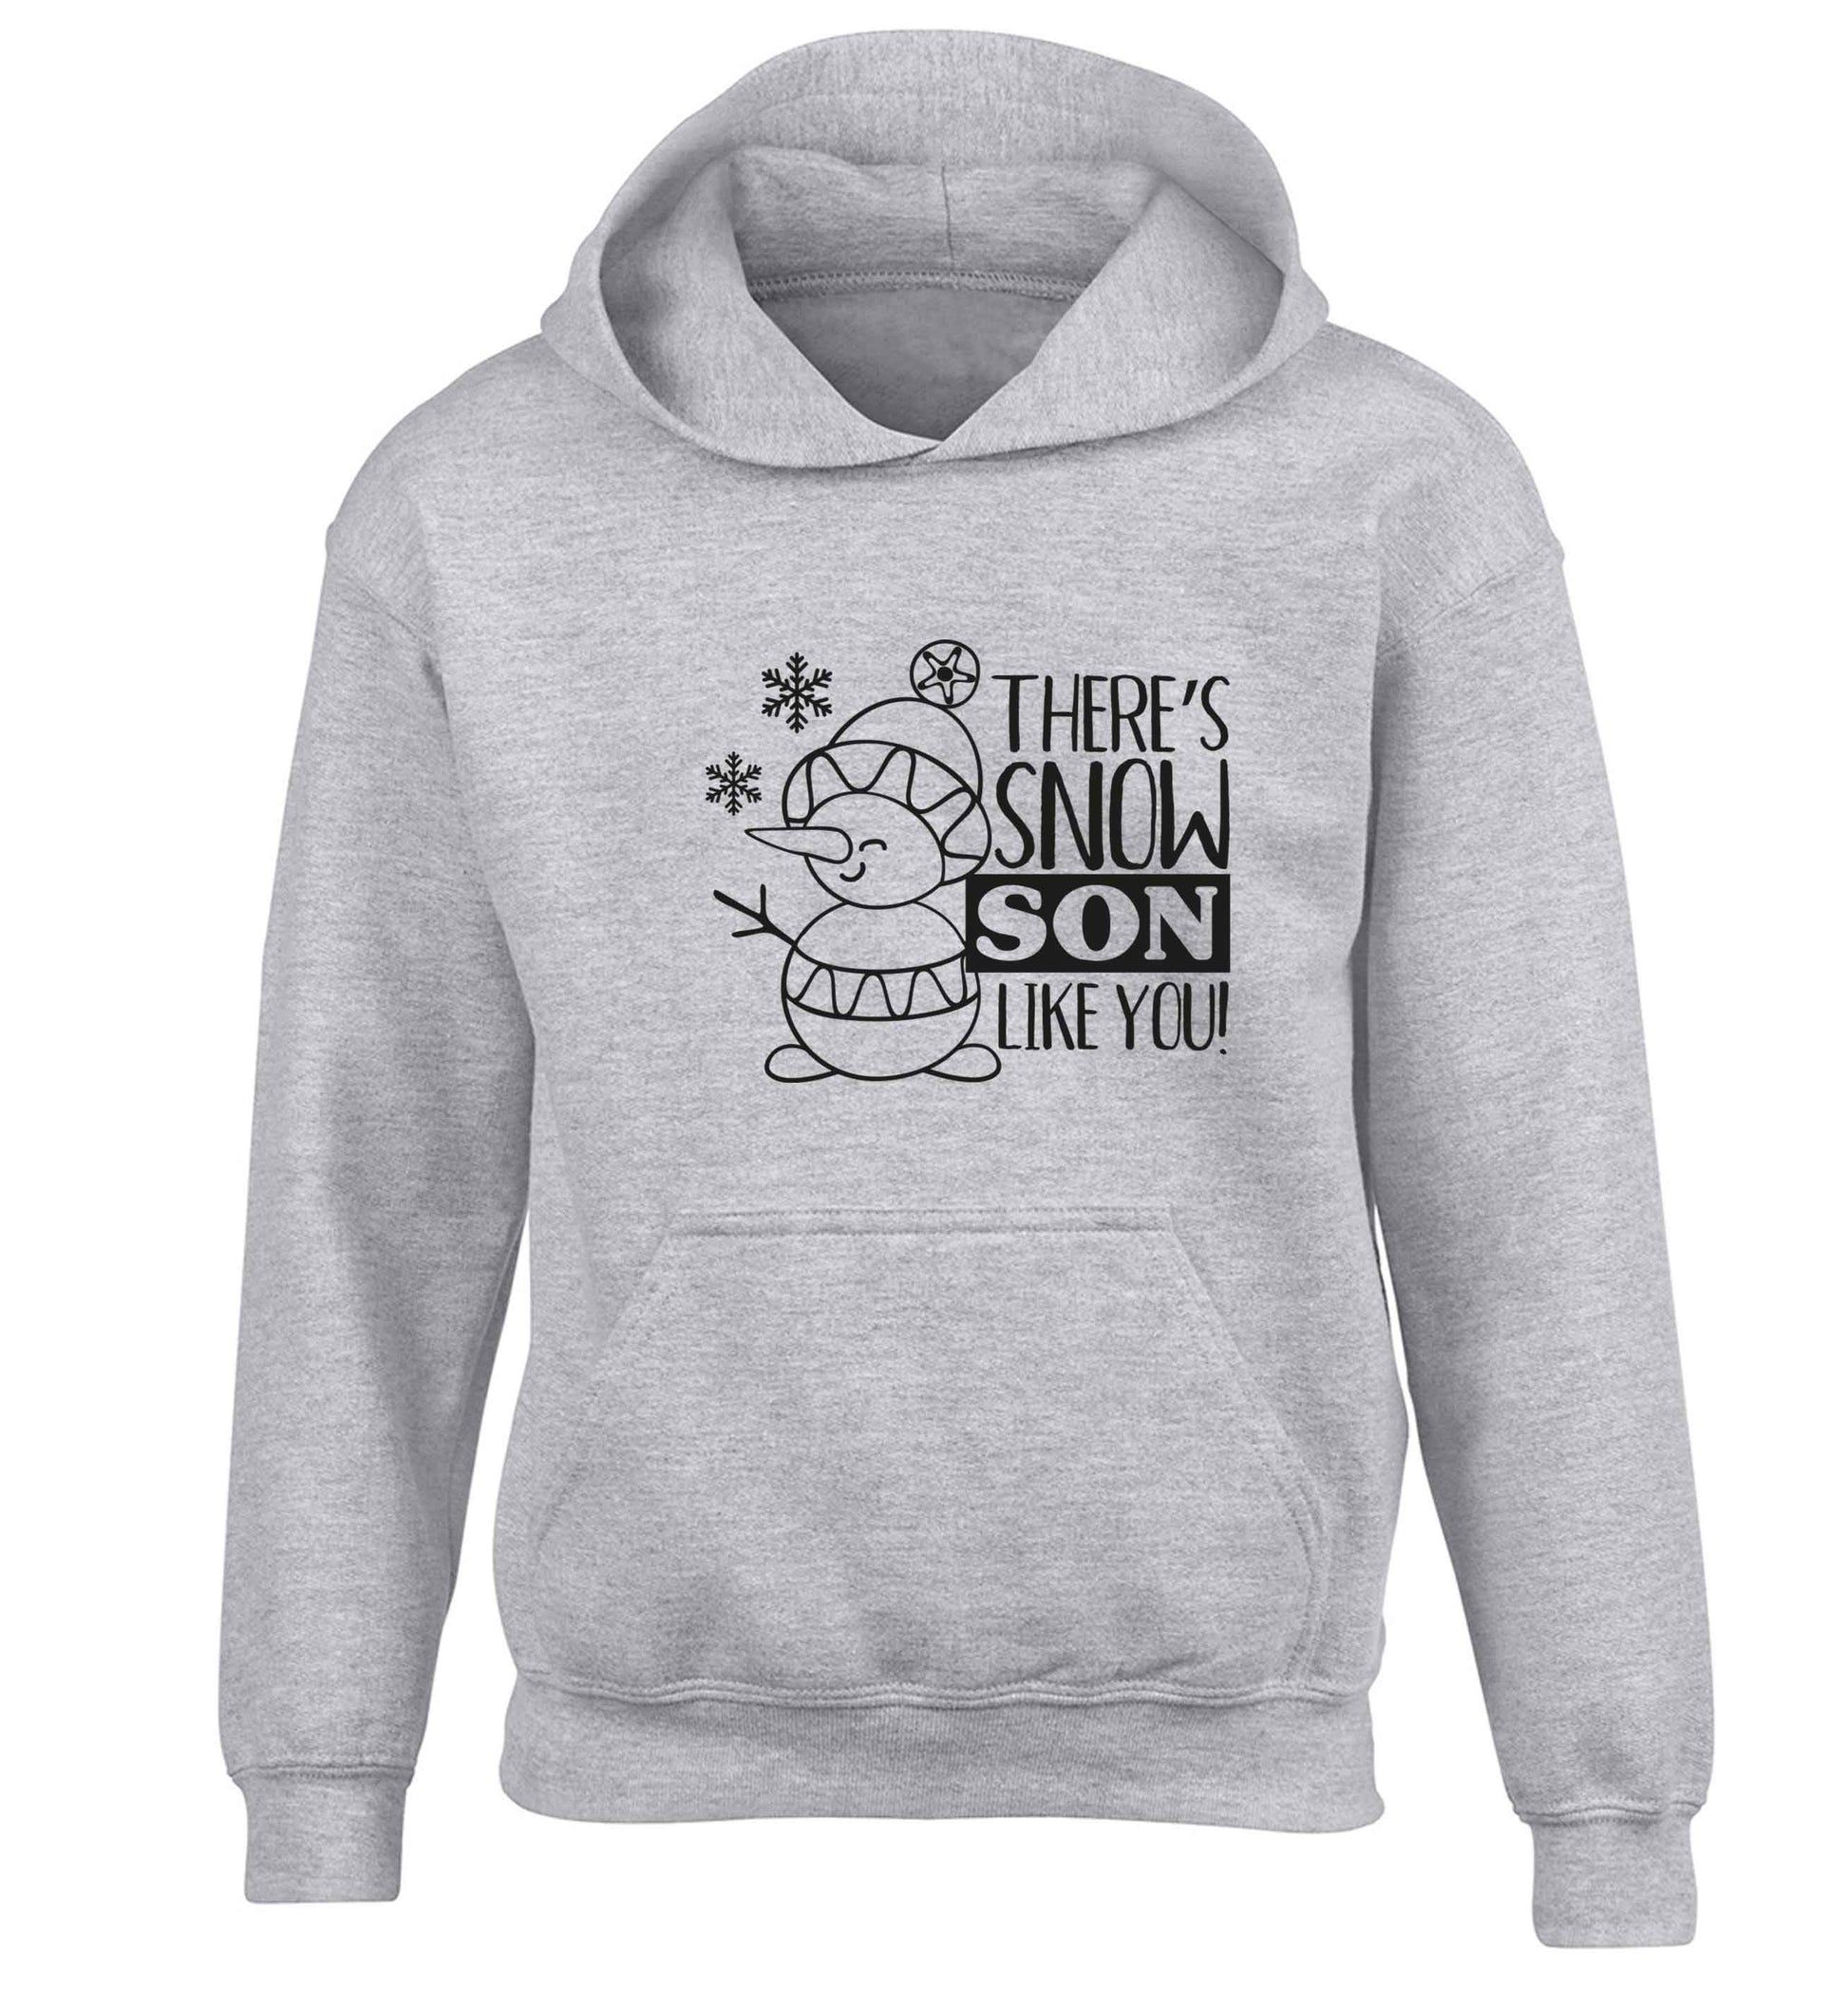 There's snow son like you children's grey hoodie 12-13 Years